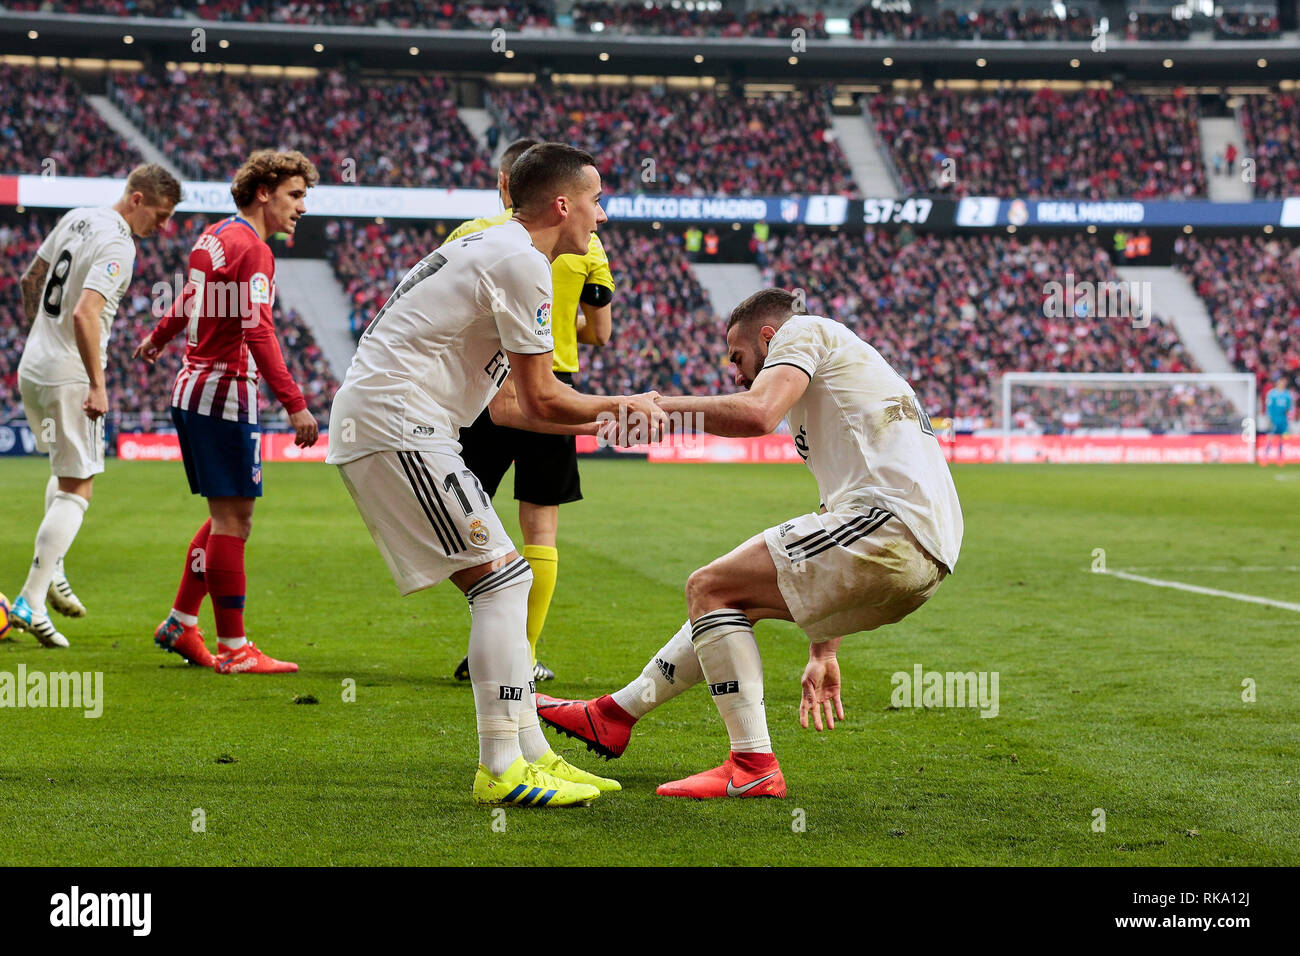 Madrid, Spain. 9th Feb 2019. Real Madrid's Dani Carvajal (L) and Lucas Vazquez (R) are seen in action during the La Liga match between Atletico de Madrid and Real Madrid at Wanda Metropolitano Stadium in Madrid, Spain. ( Final score: Atletico de Madrid 1:3 Real Madrid ) Credit: SOPA Images Limited/Alamy Live News Stock Photo